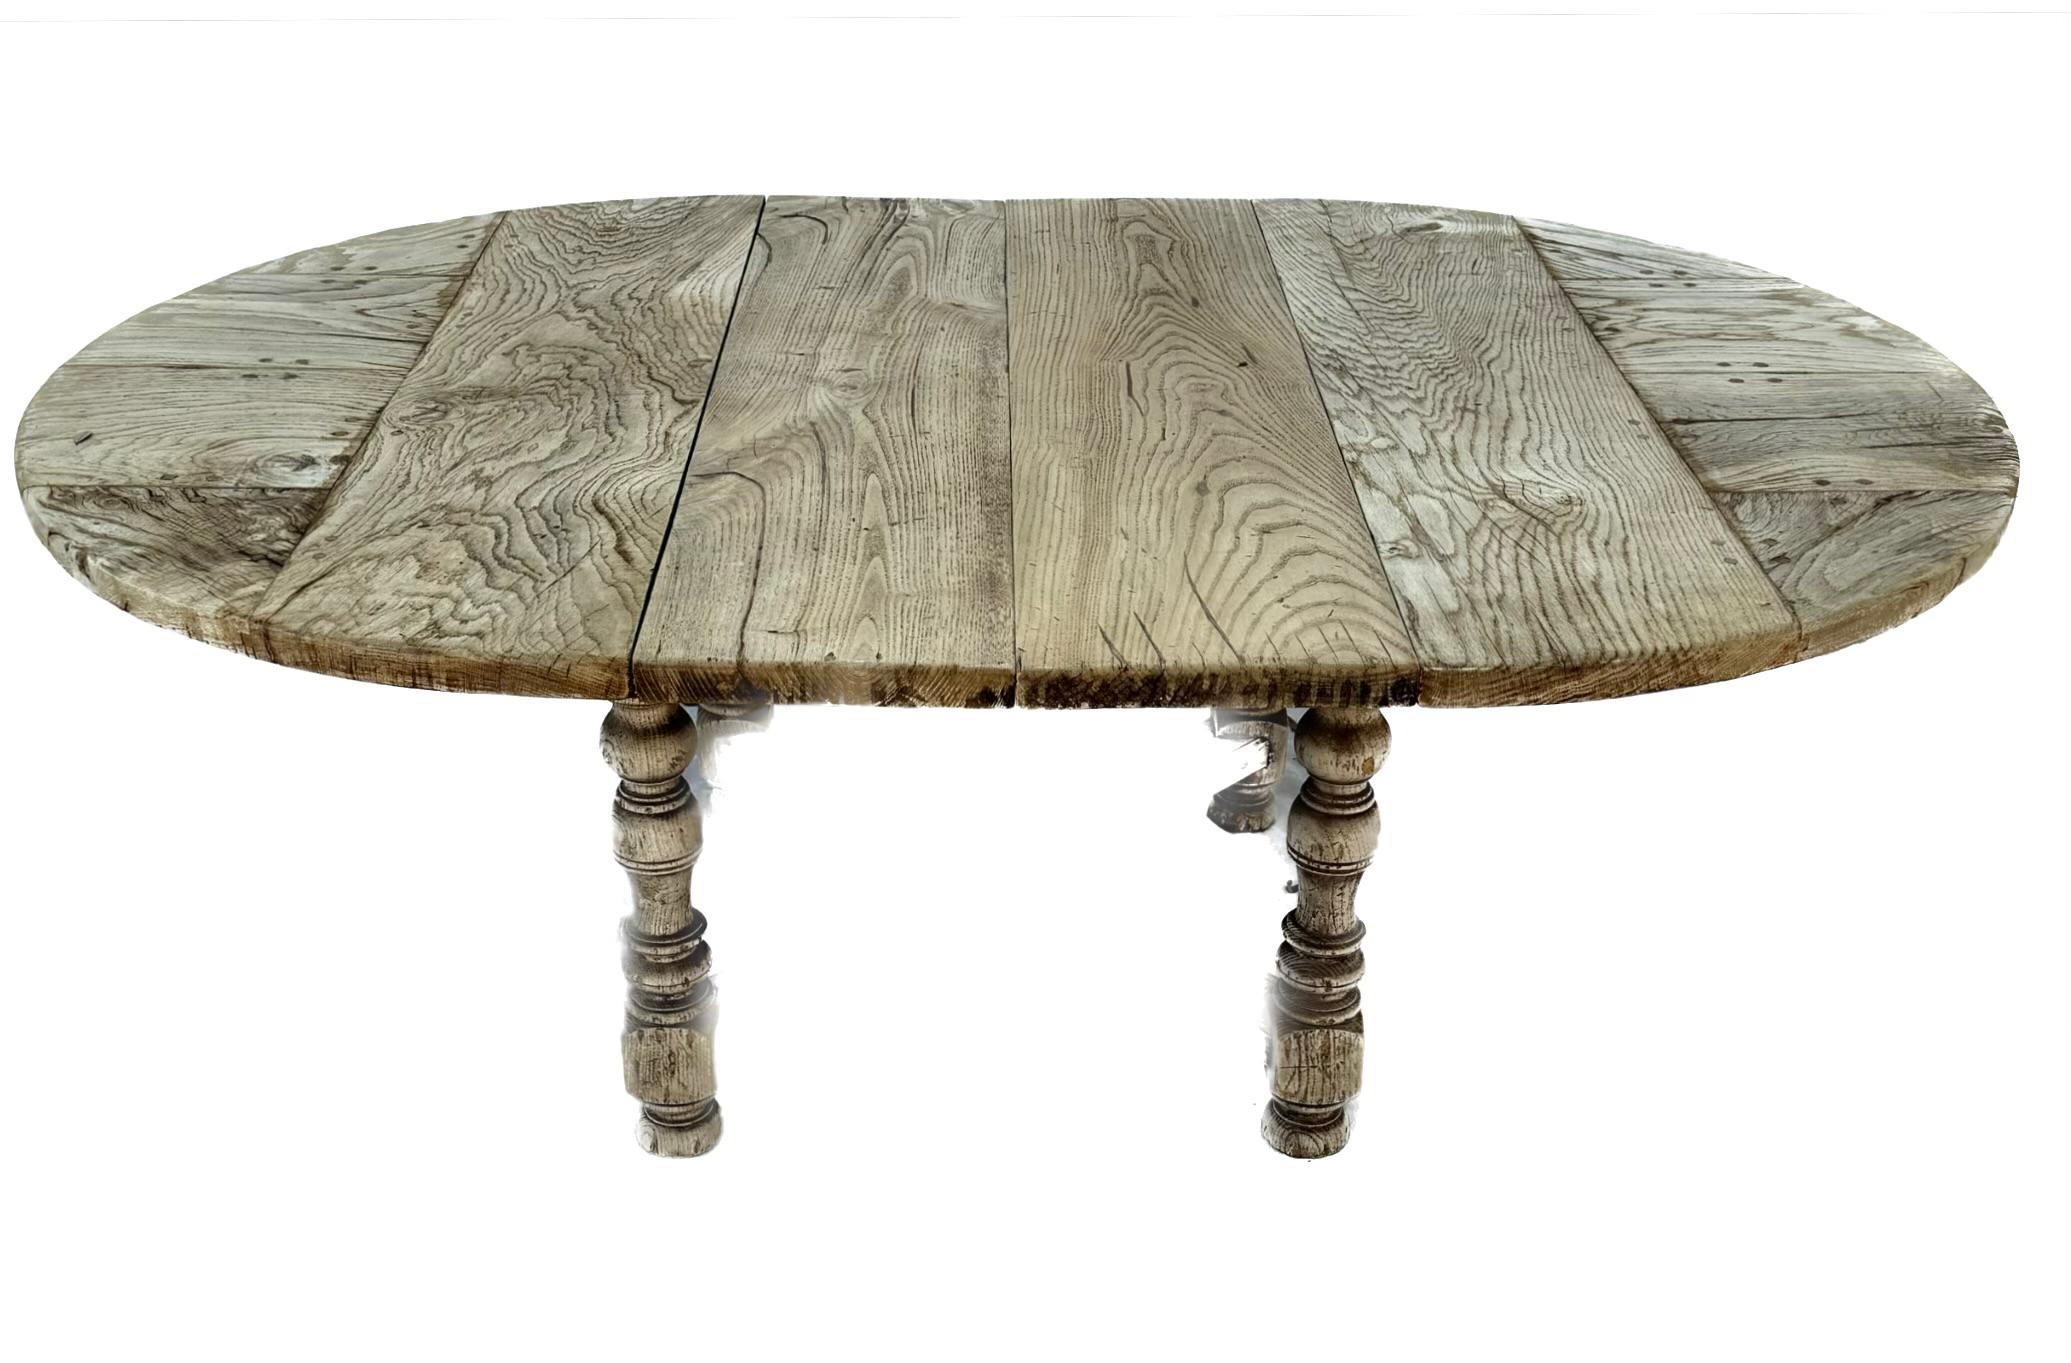 Wood Bleached Oak Table With Two Leaves